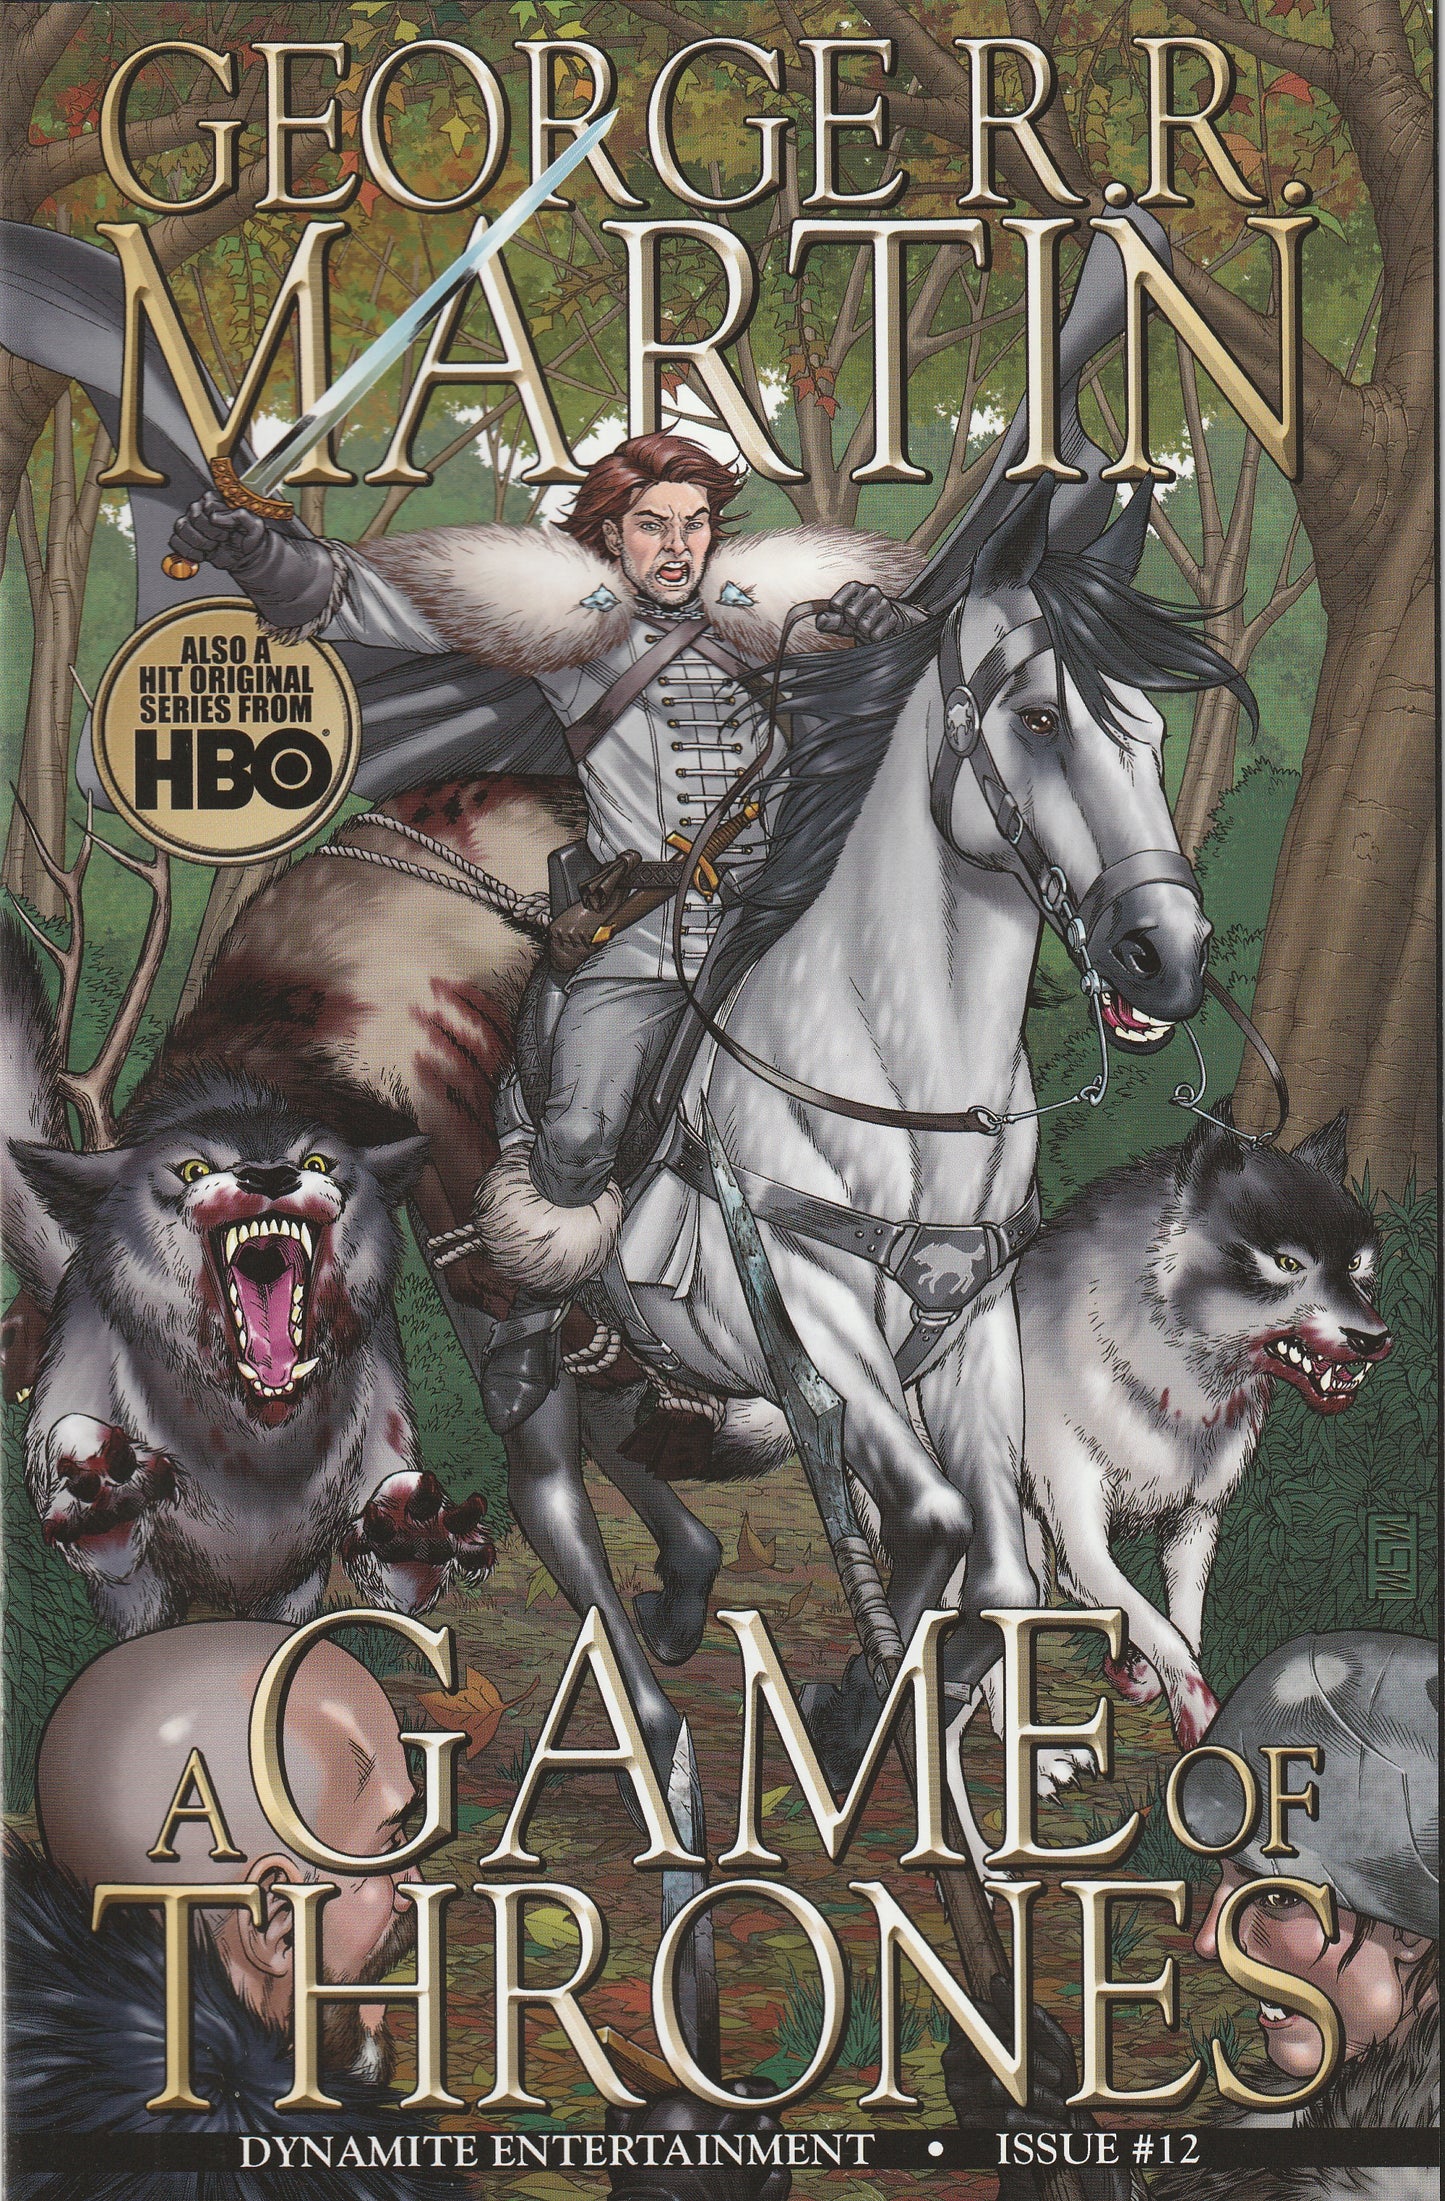 A Game of Thrones #12 (2012) - George R.R. Martin